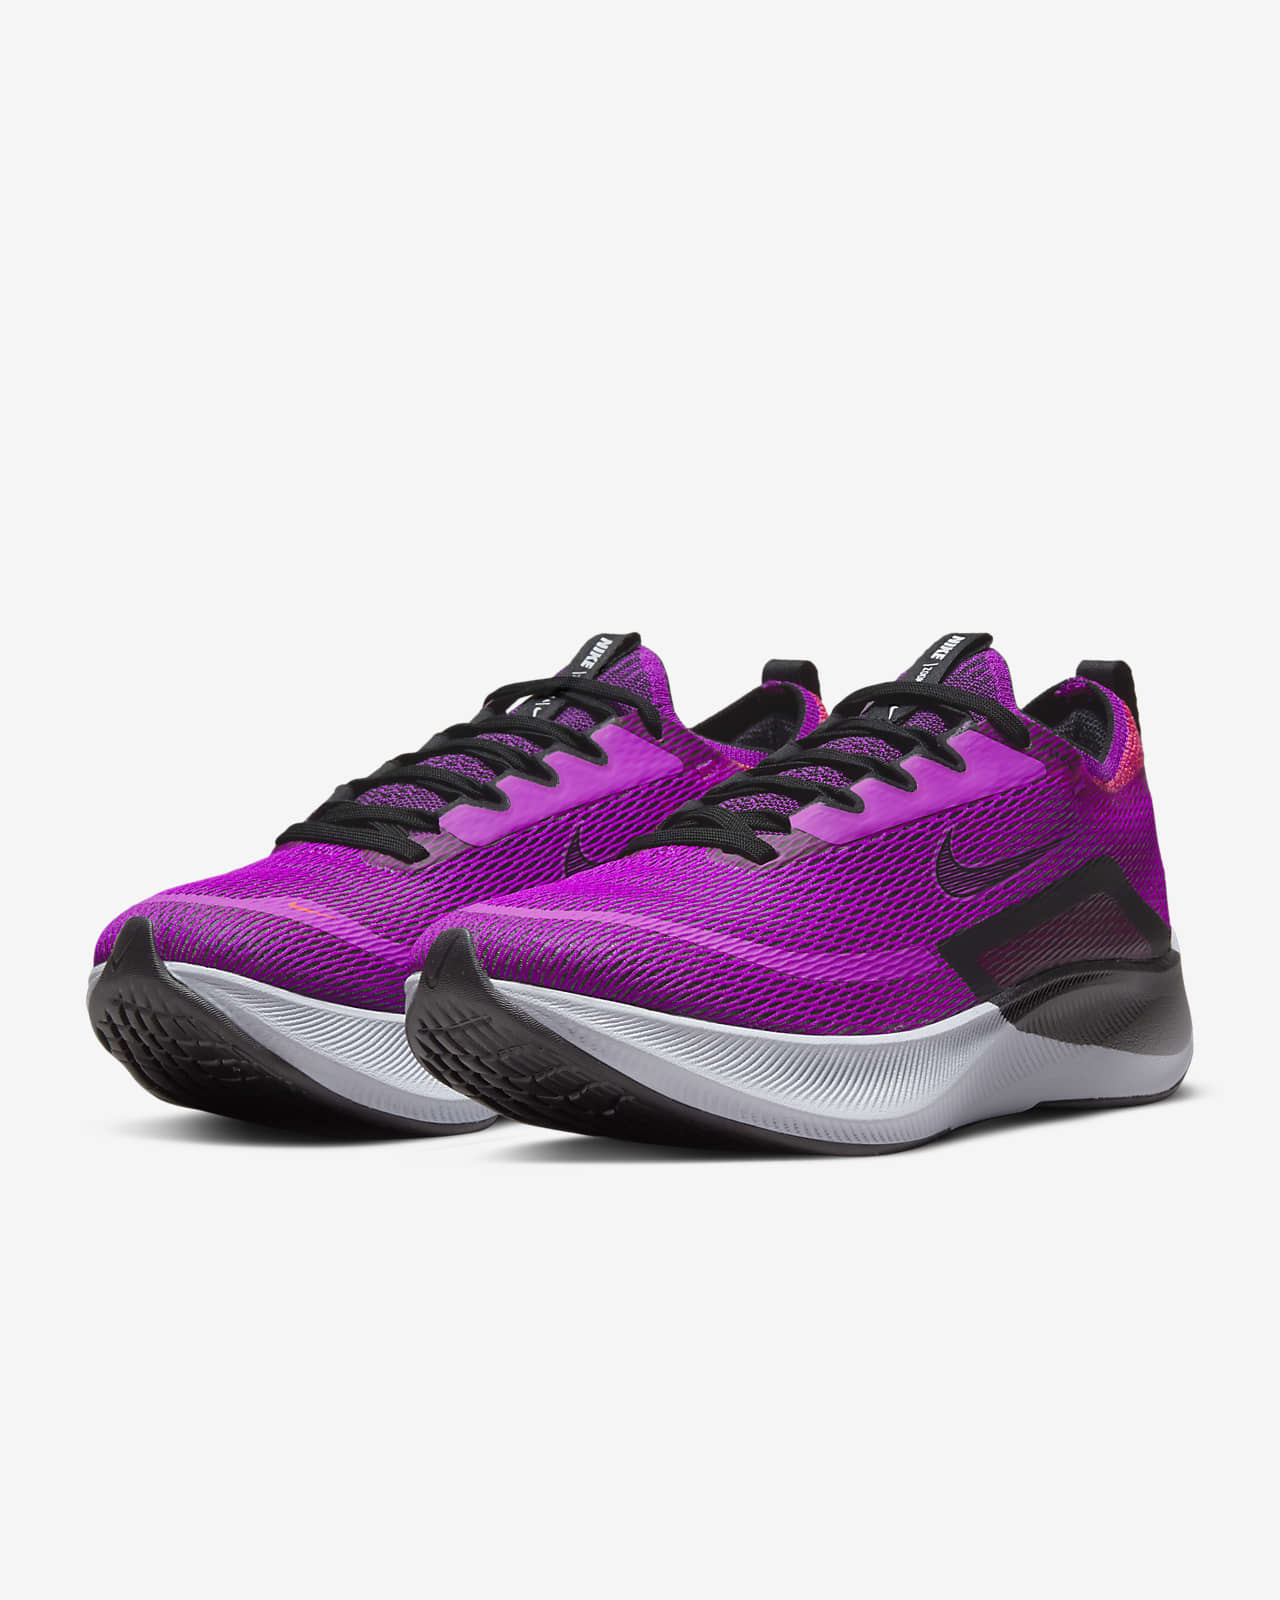 Retention tool upside down Nike Zoom Fly 4 Women's Road Running Shoes. Nike.com